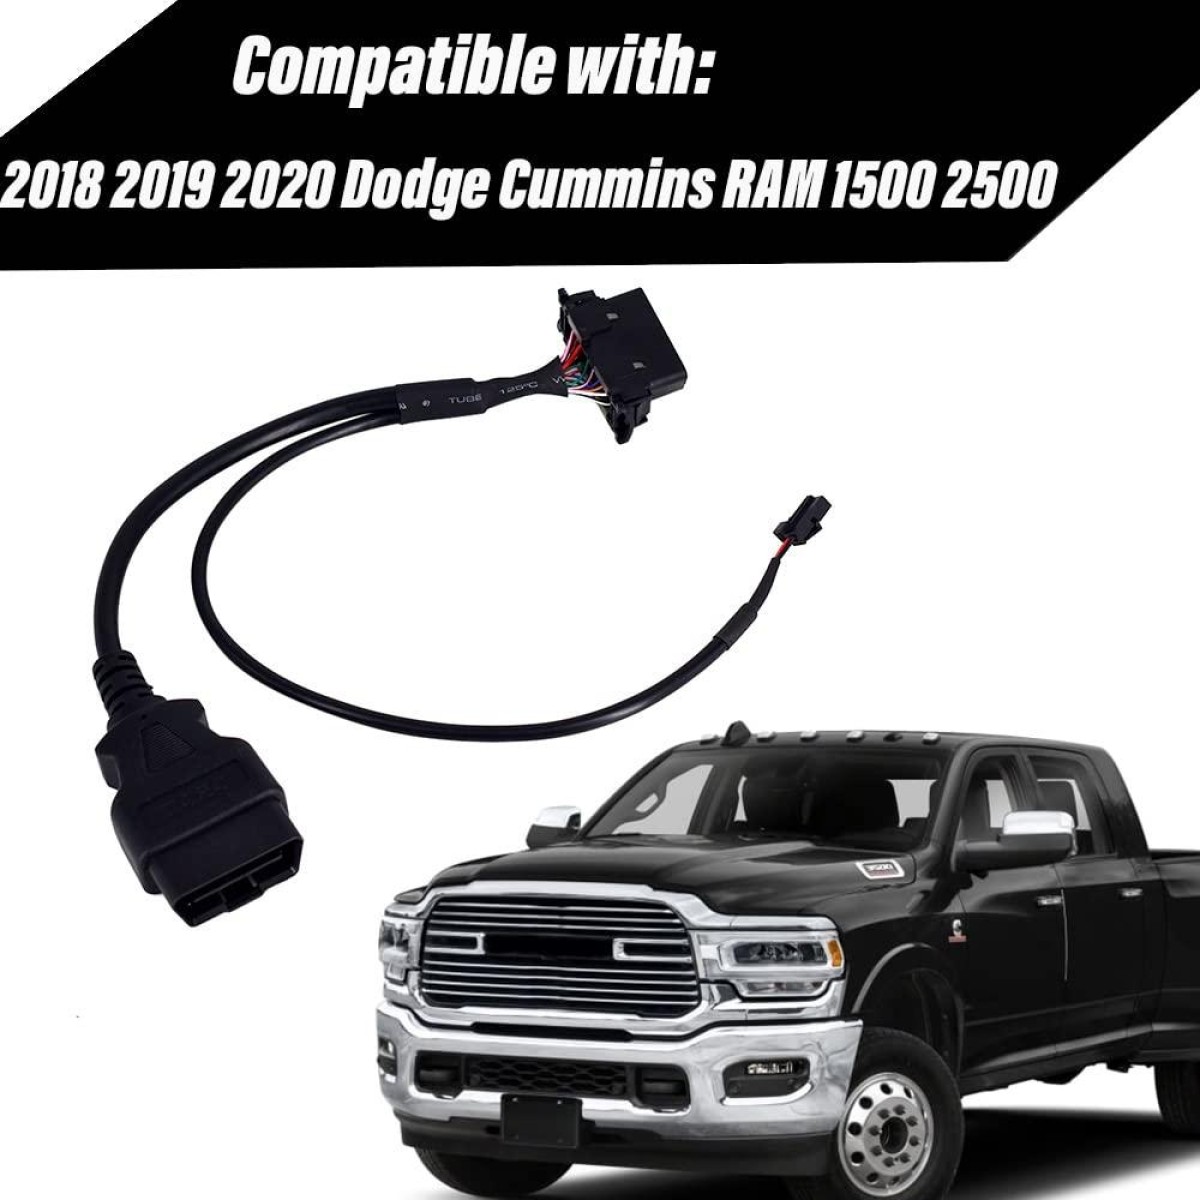 Safety Gate Bypass OBD2 Cable for Dodge Cummins RAM 1500 2500 2018-2020